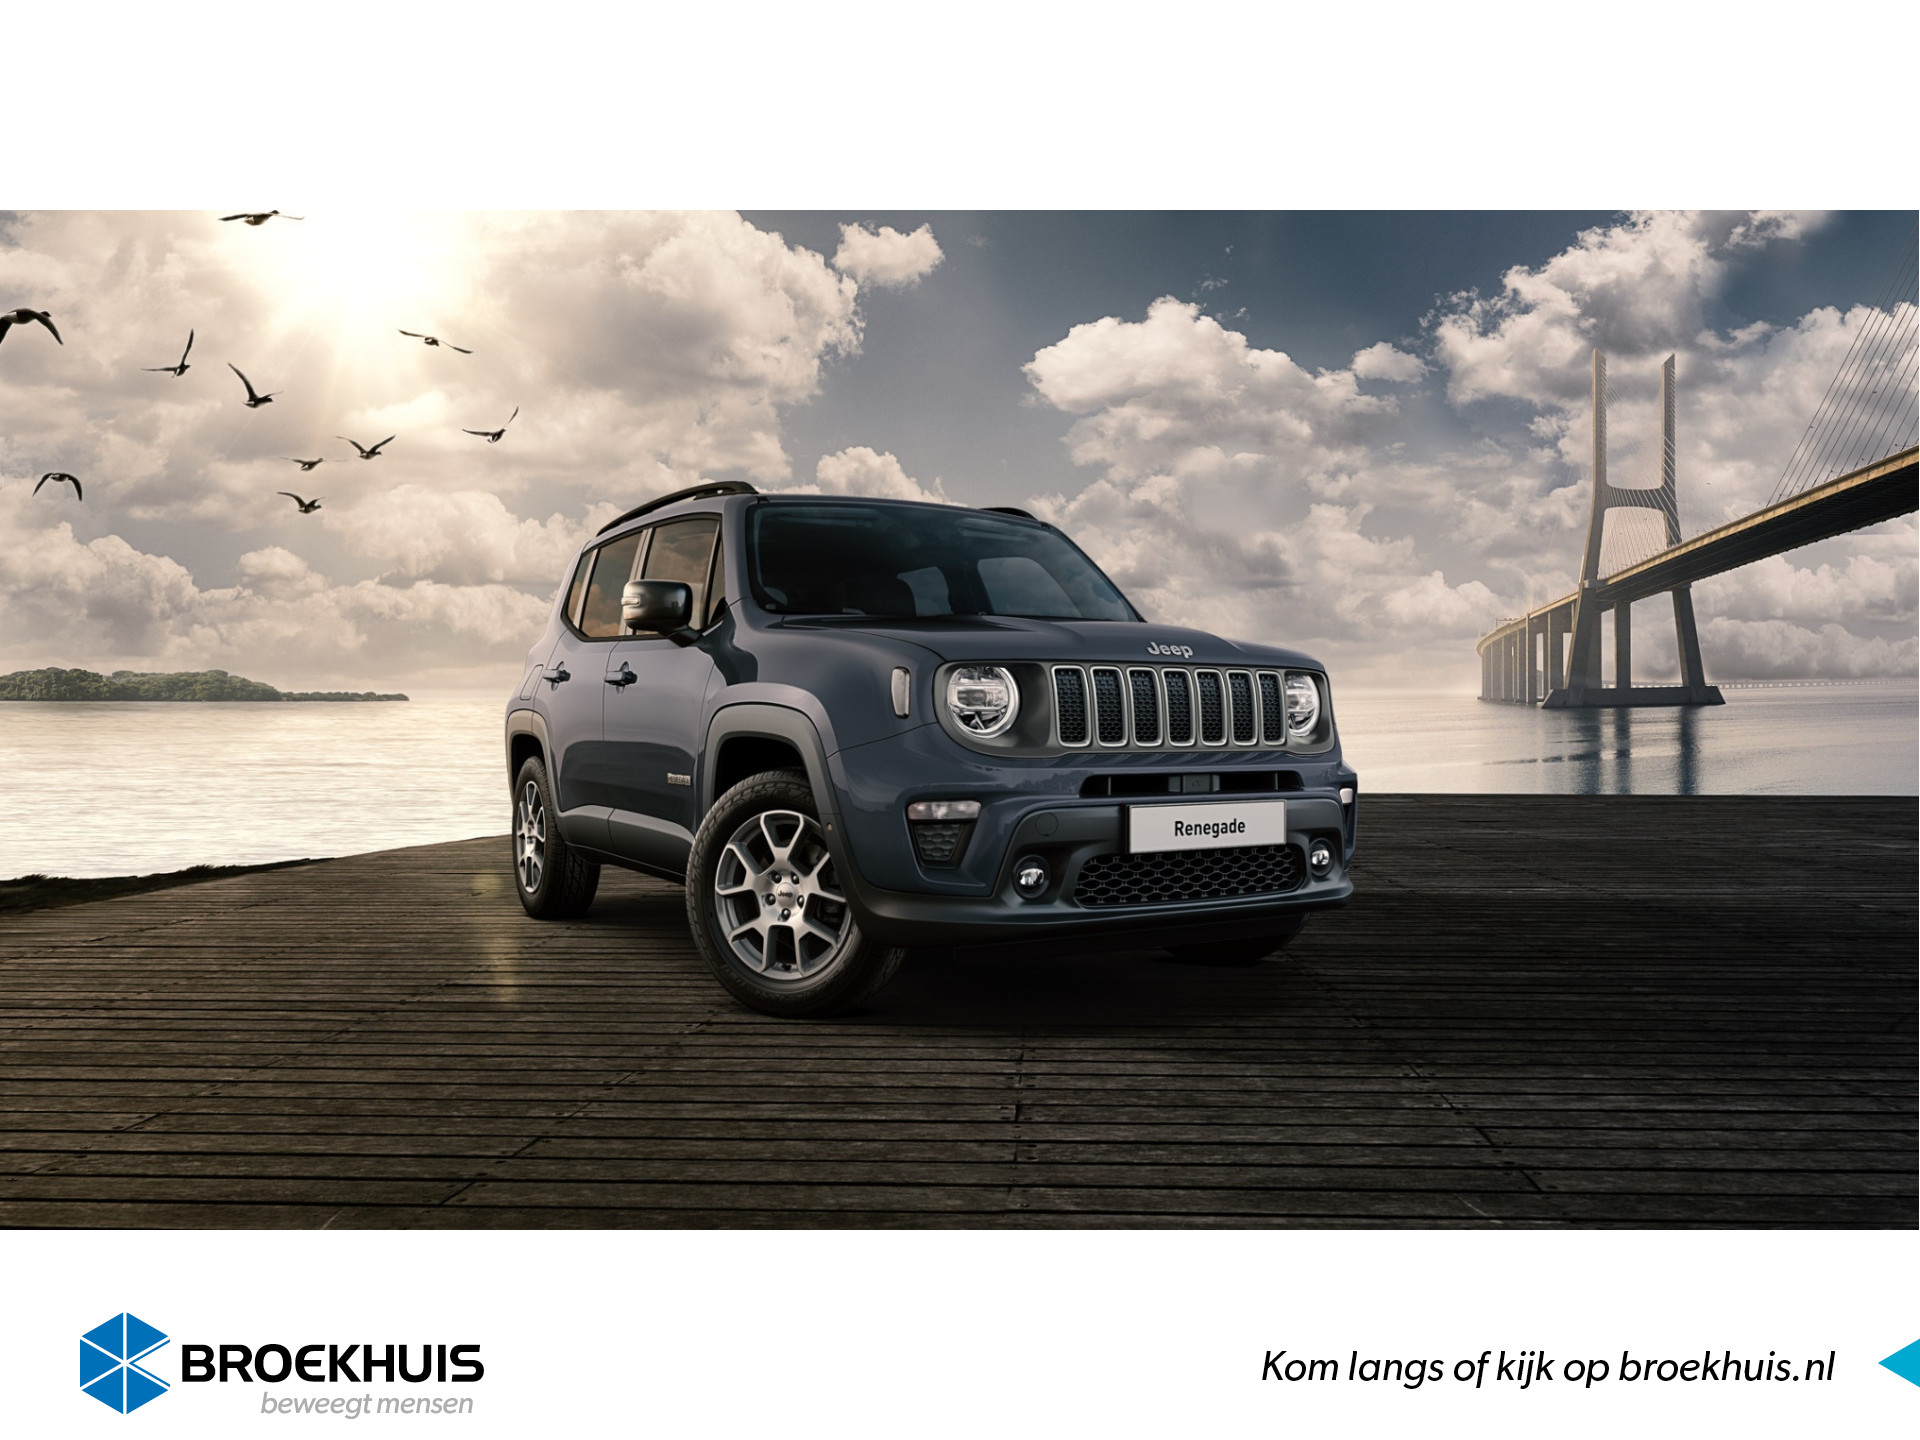 Jeep Renegade 1.5T 130 pk Automaat e-Hybrid Limited Convenience Pack | Style Pack |  Visibility Pack | Uconnect™ LIVE-infotainmentsysteem met 8,4-inch Touchscreen, Navigatie en Bluetooth bij viaBOVAG.nl